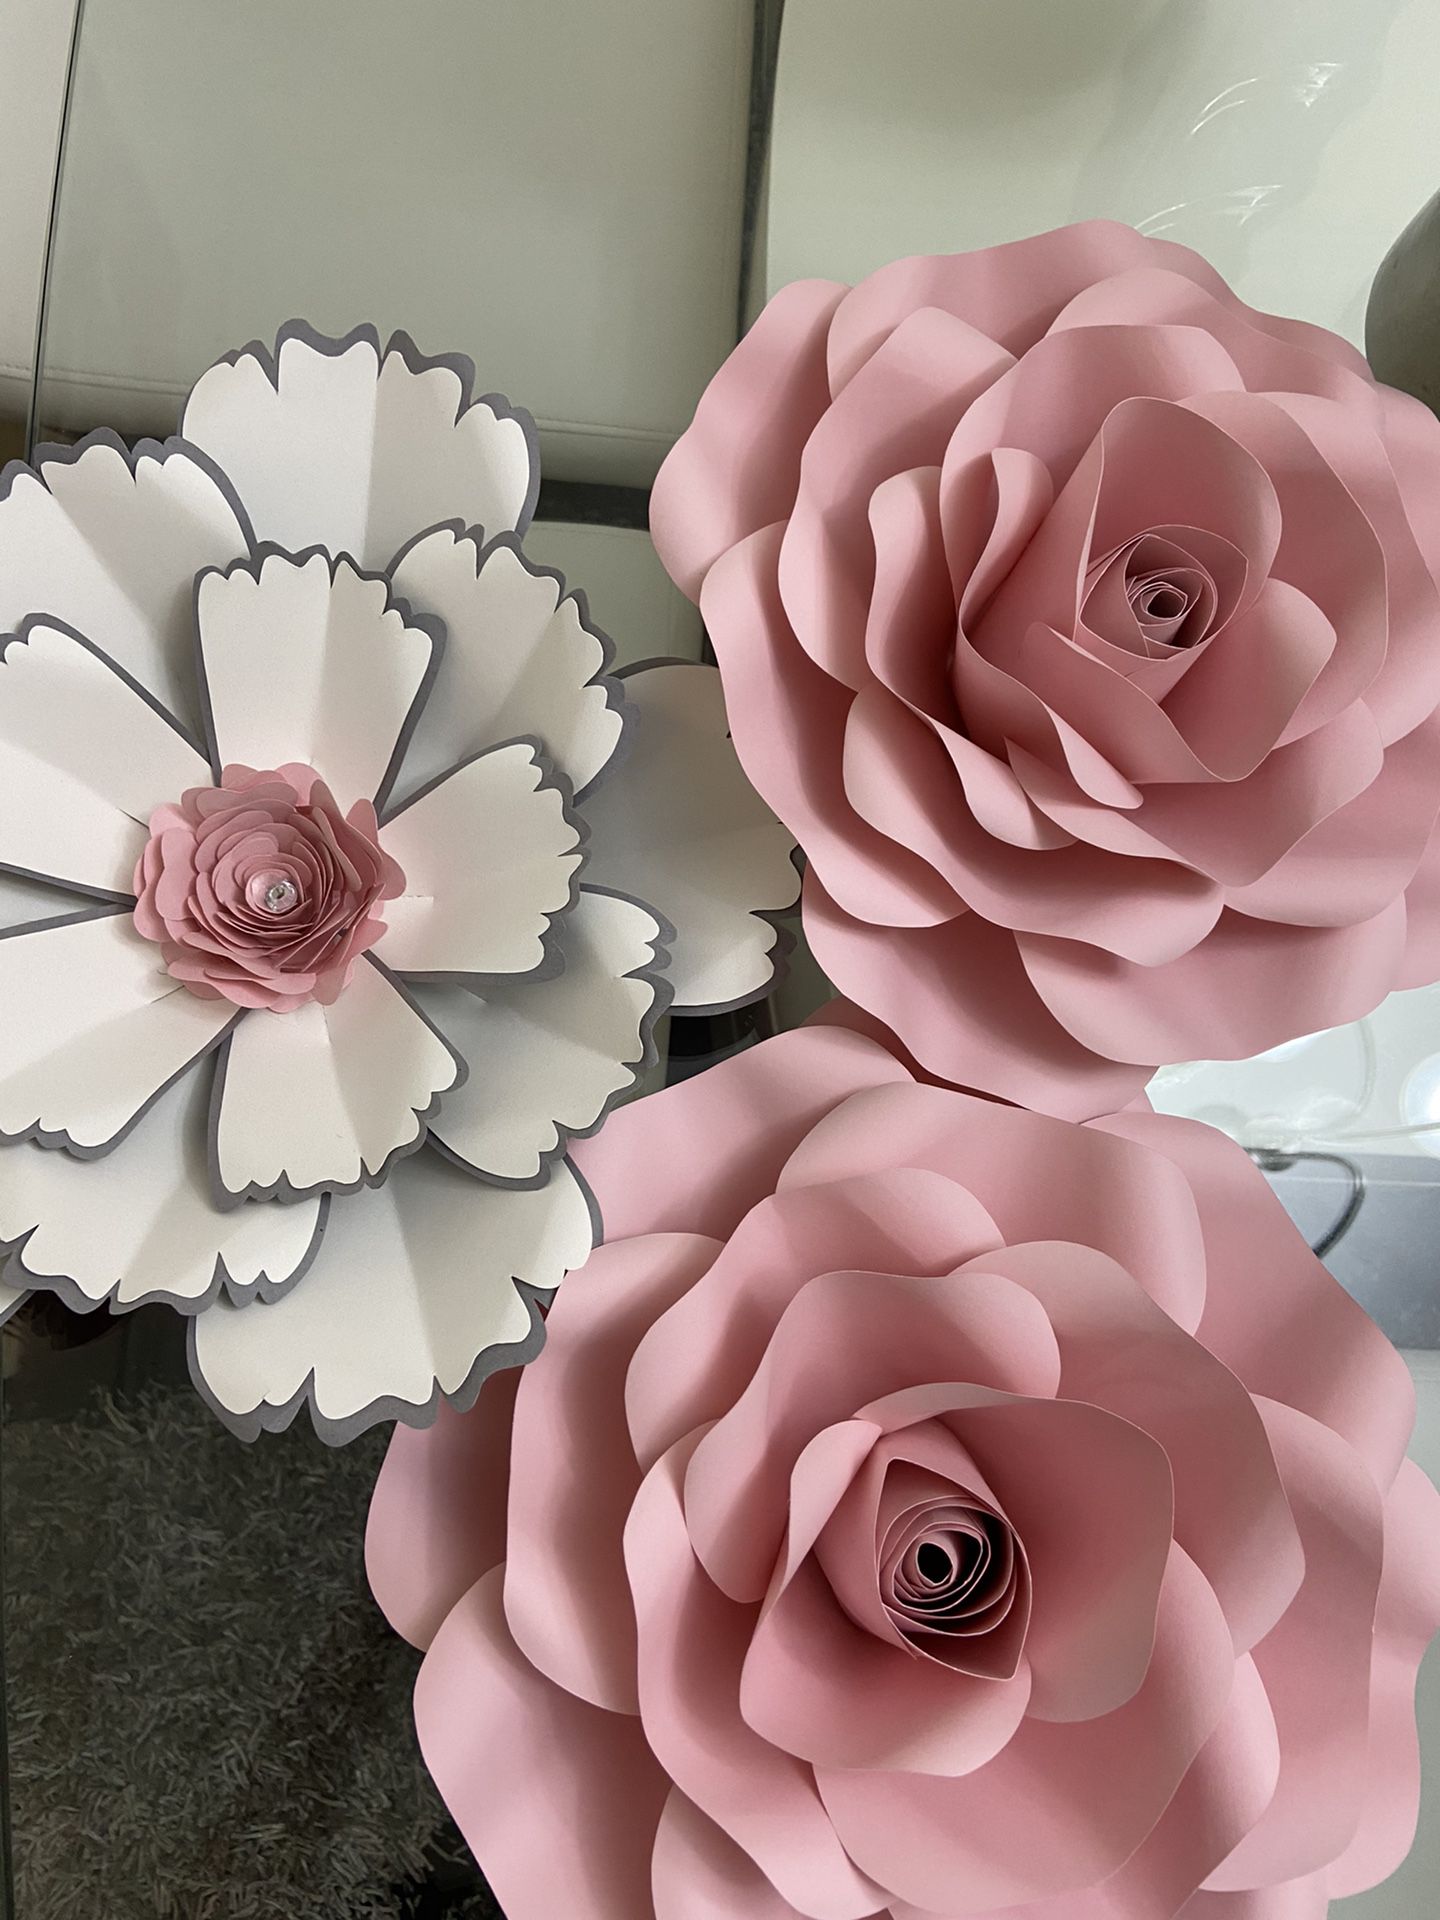 Set Of 3 Handmade paper flowers and decorations.